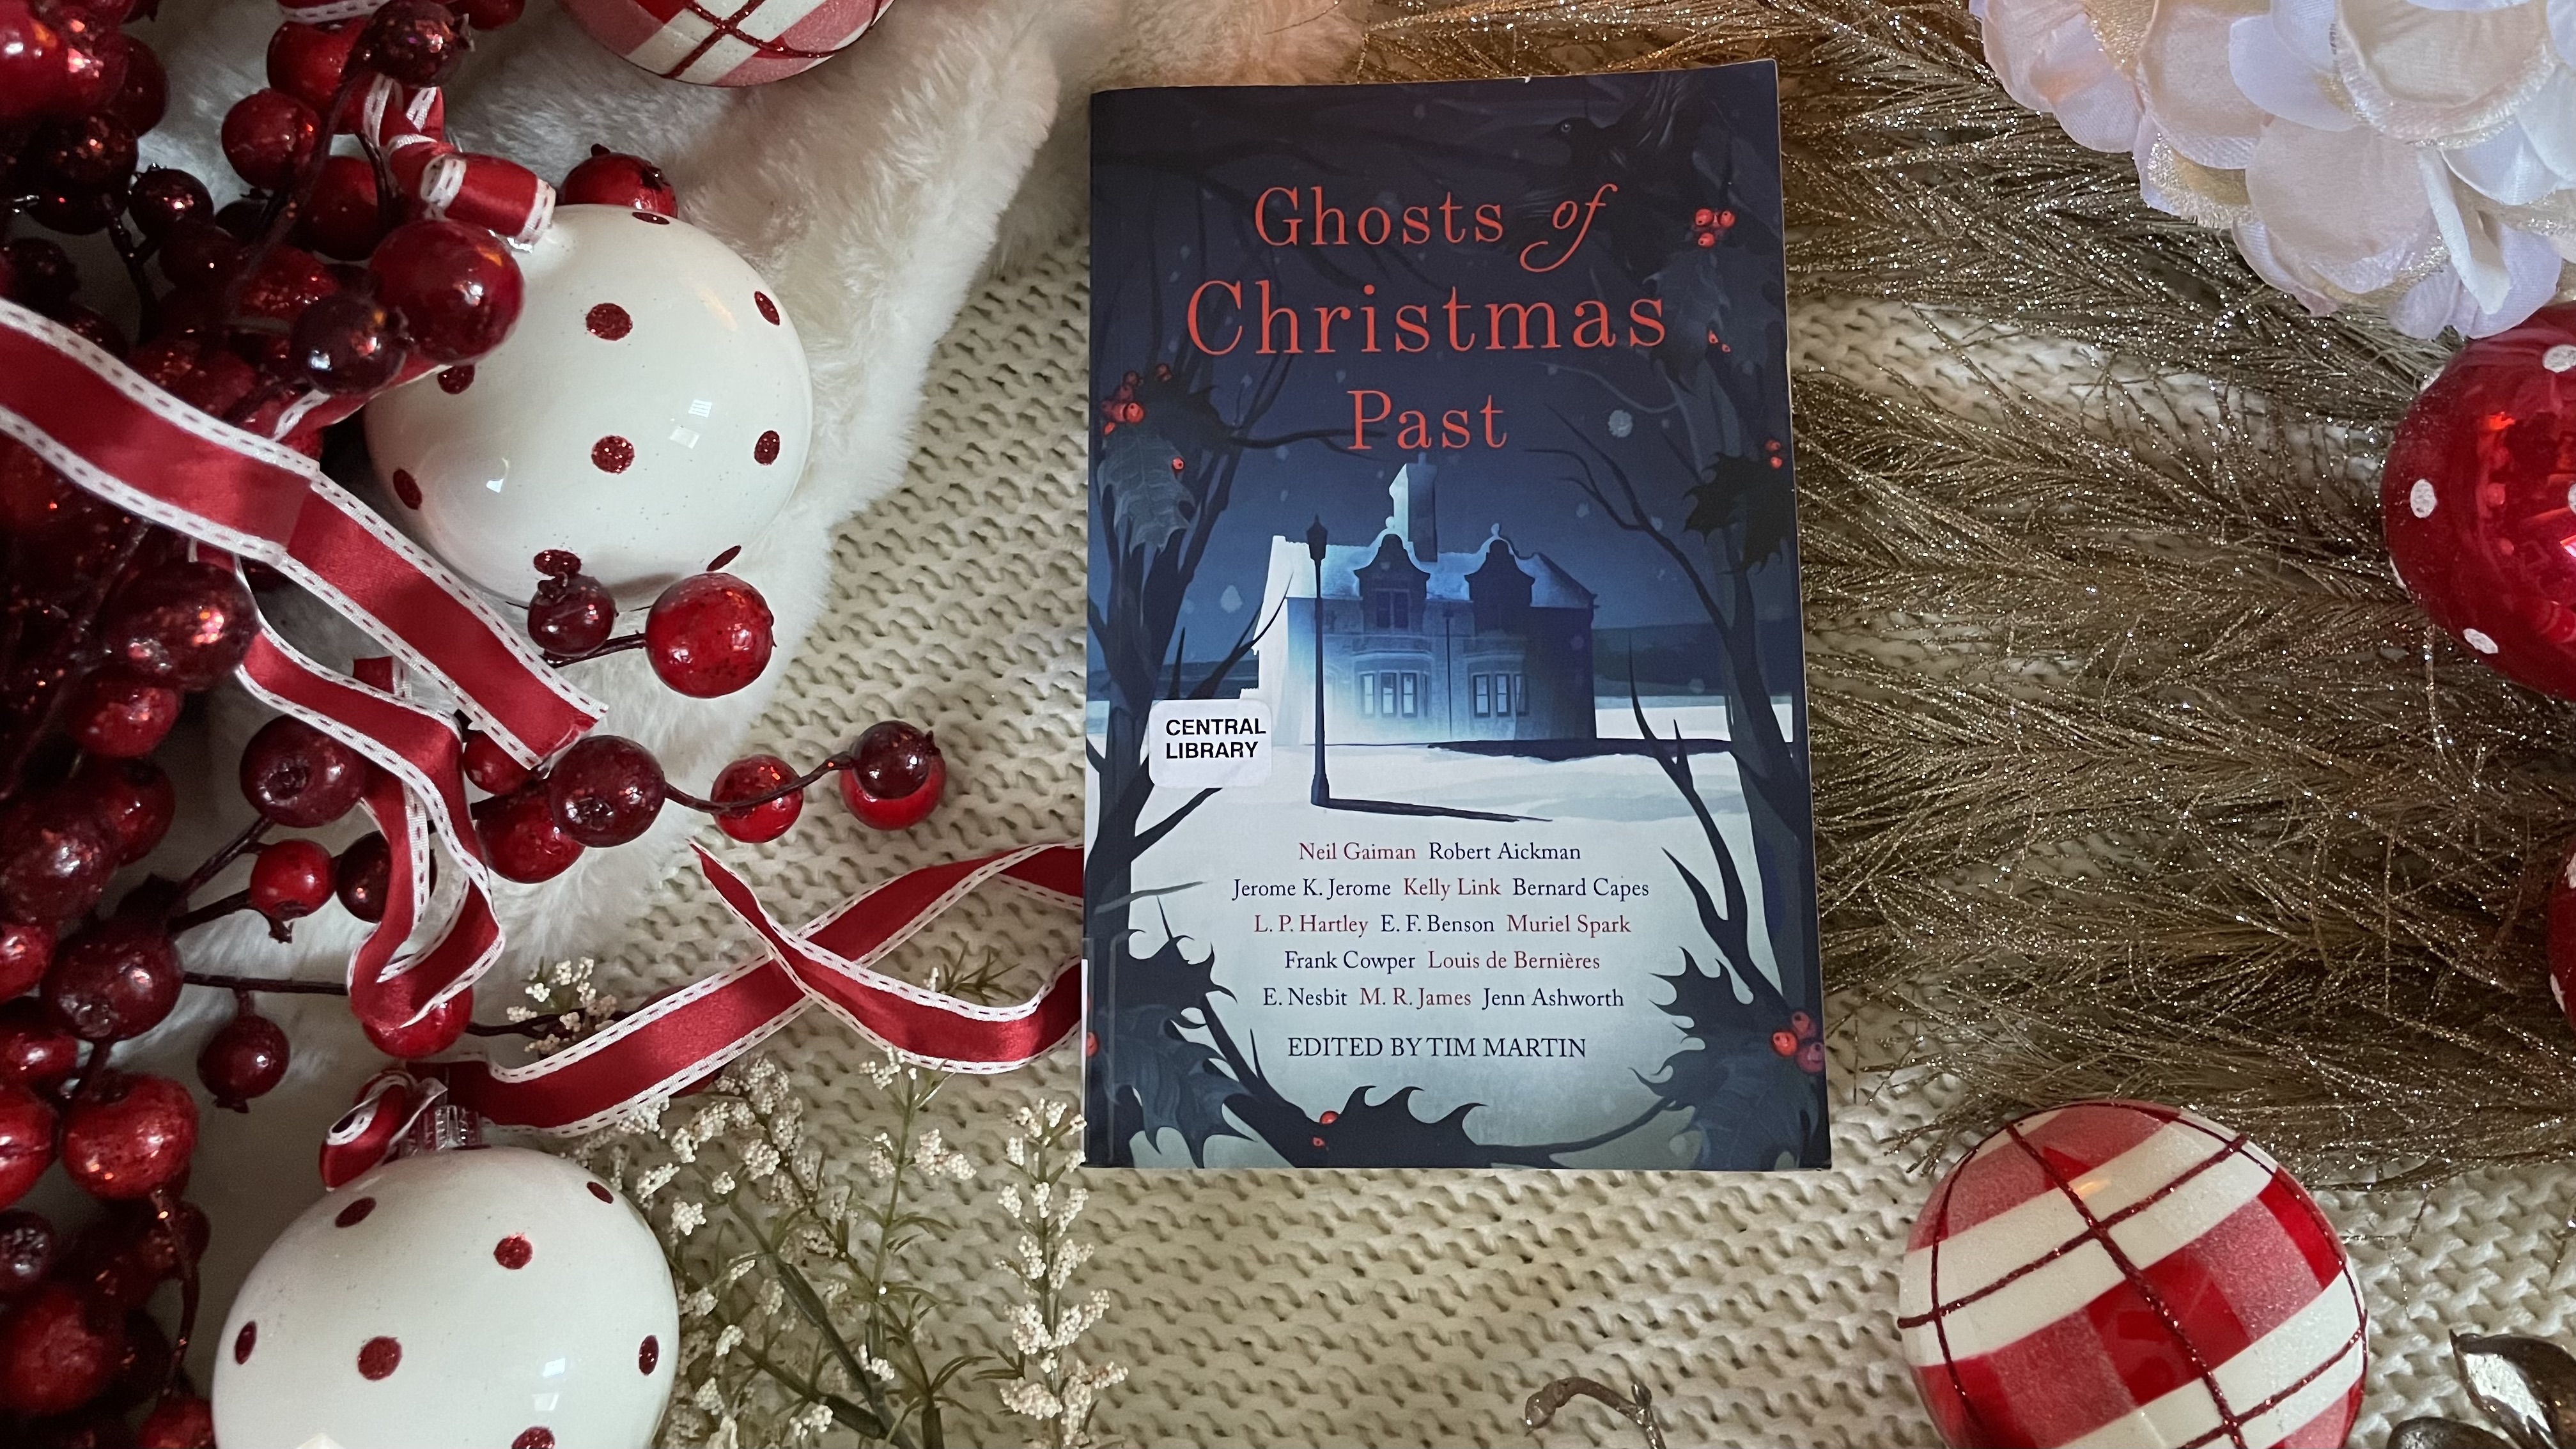 Christmas ghost story book Ghosts of Christmas Past, surrounded by holiday ornaments and berries in red and white